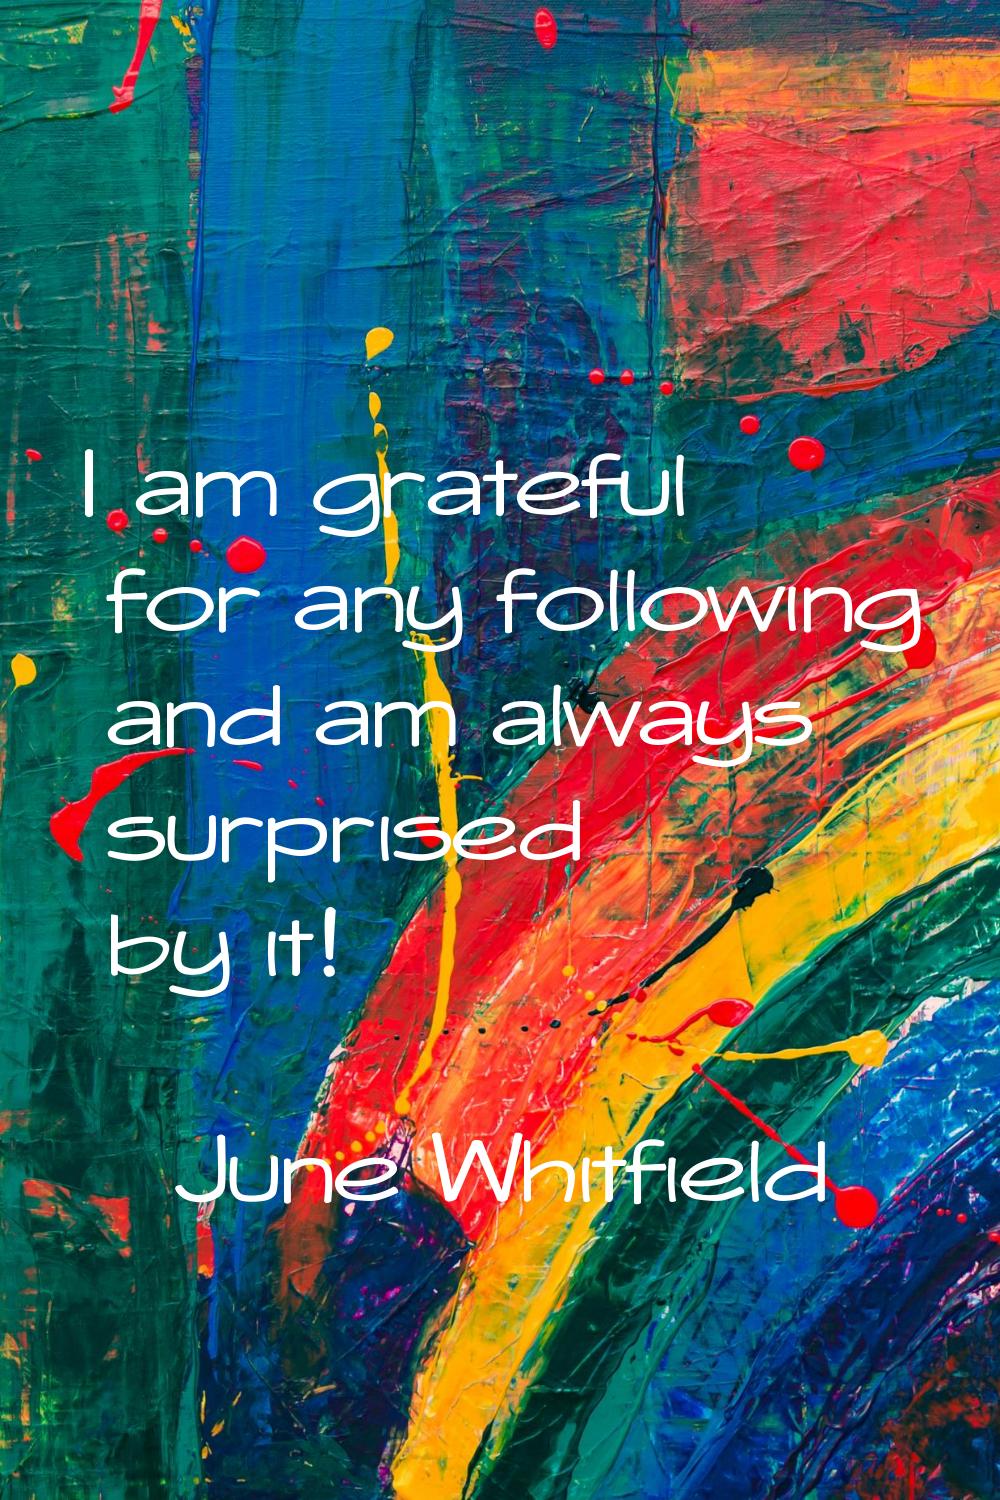 I am grateful for any following and am always surprised by it!